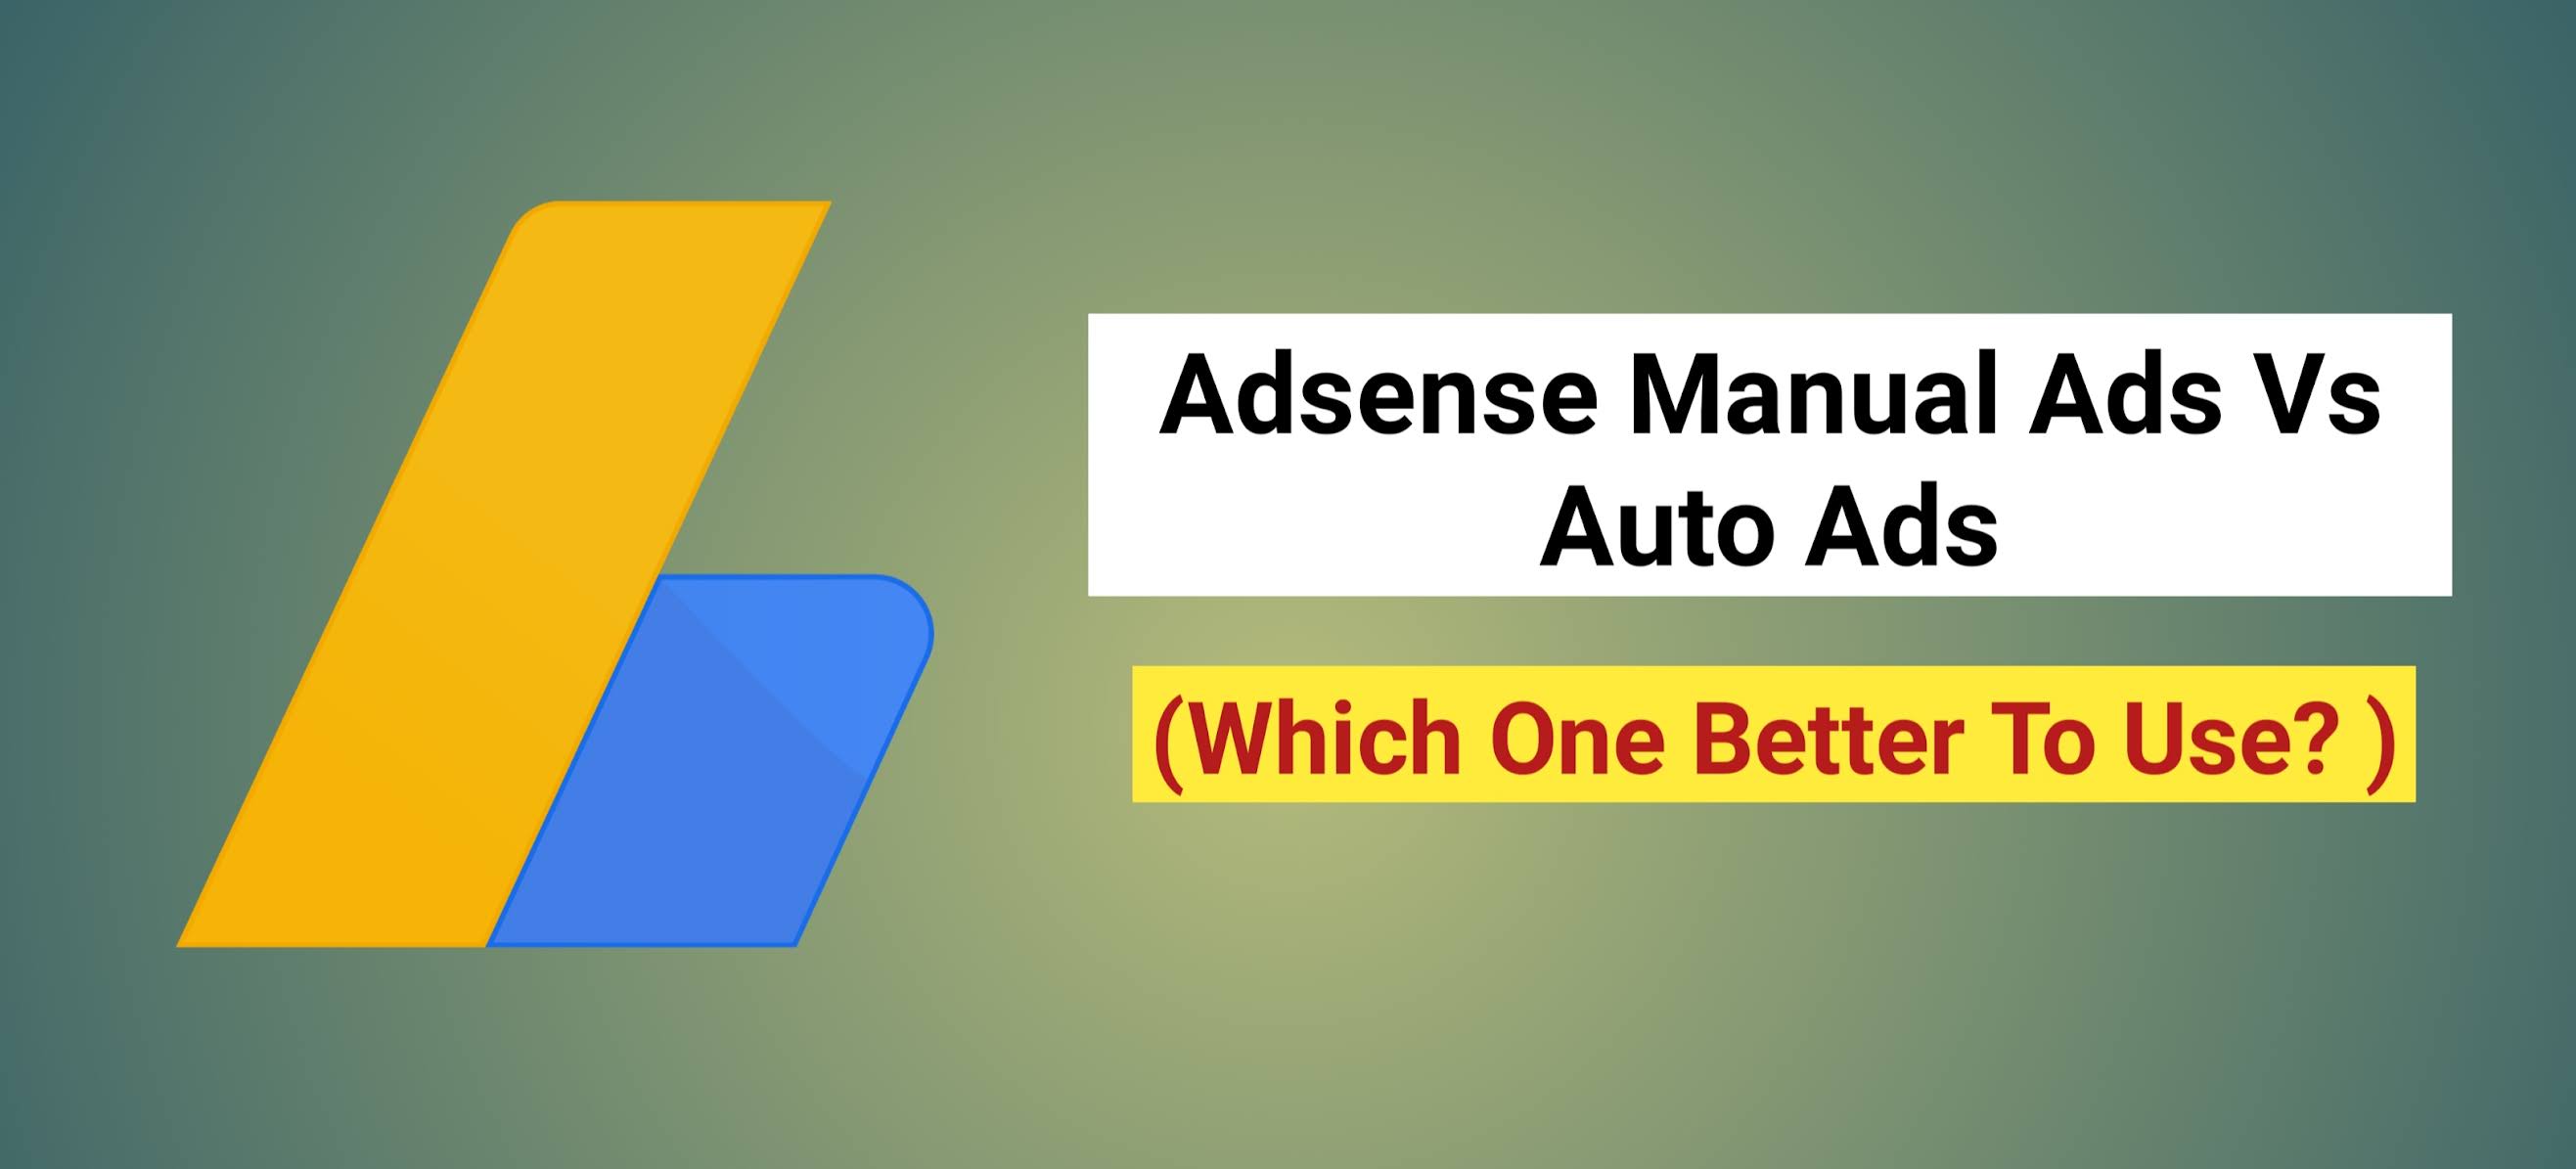 Adsense Manual Ads Vs Auto Ads Which One Better To Use ?